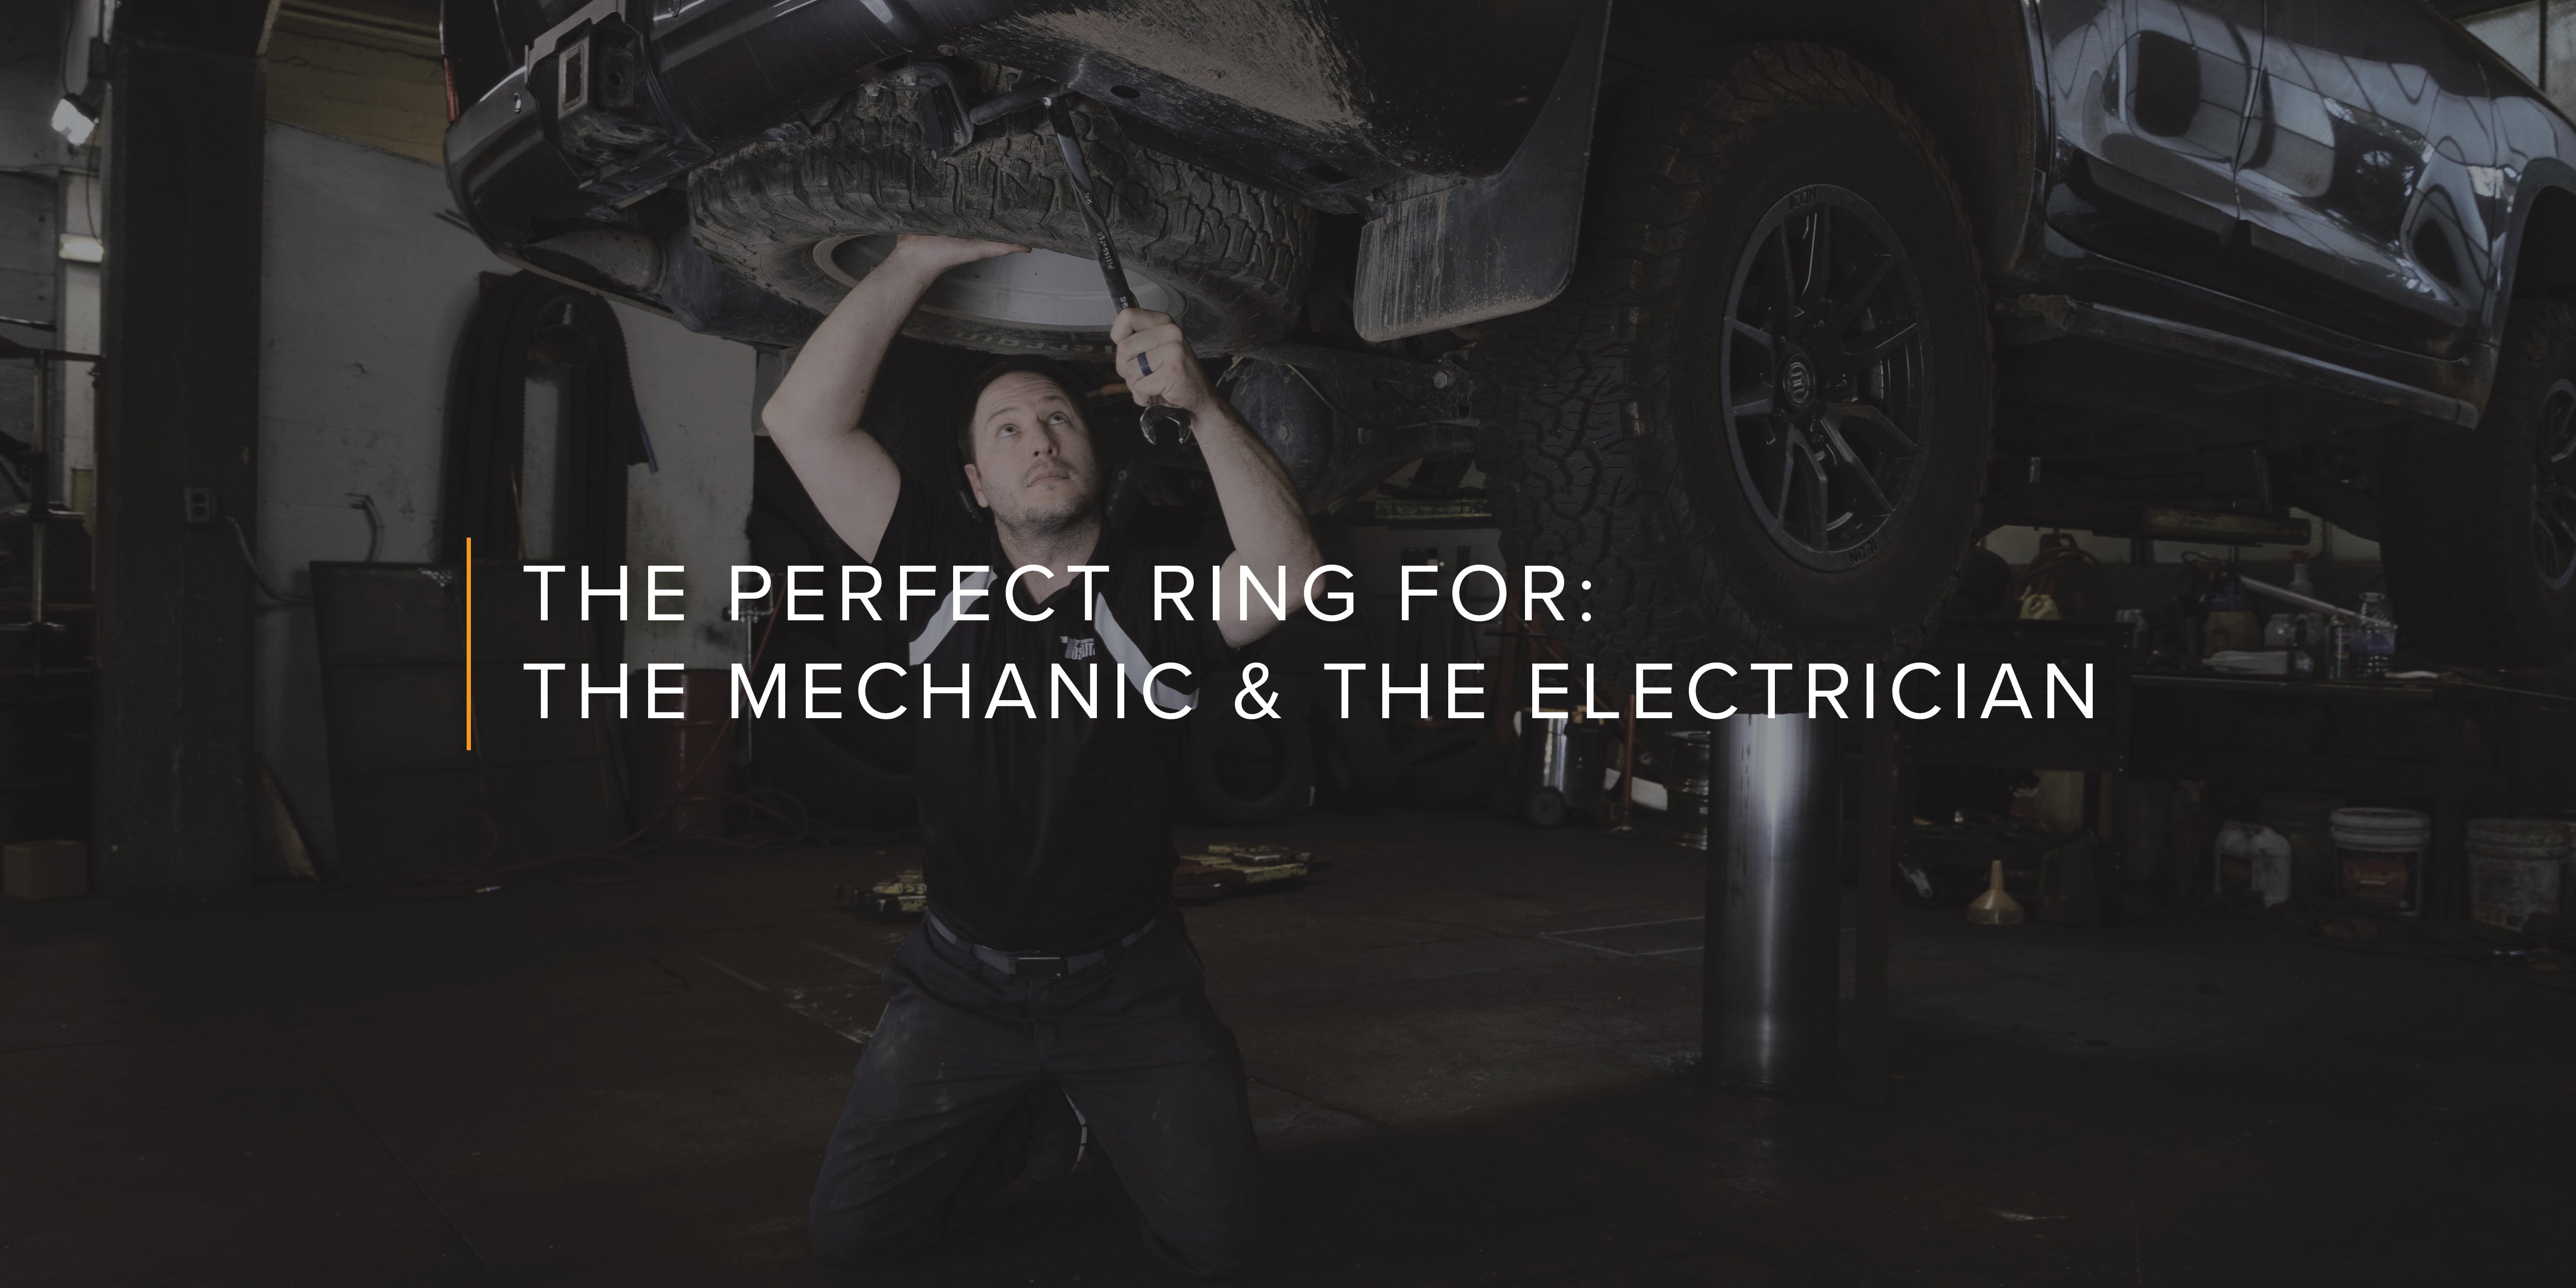 The Perfect Ring For: The Mechanic & The Electrician